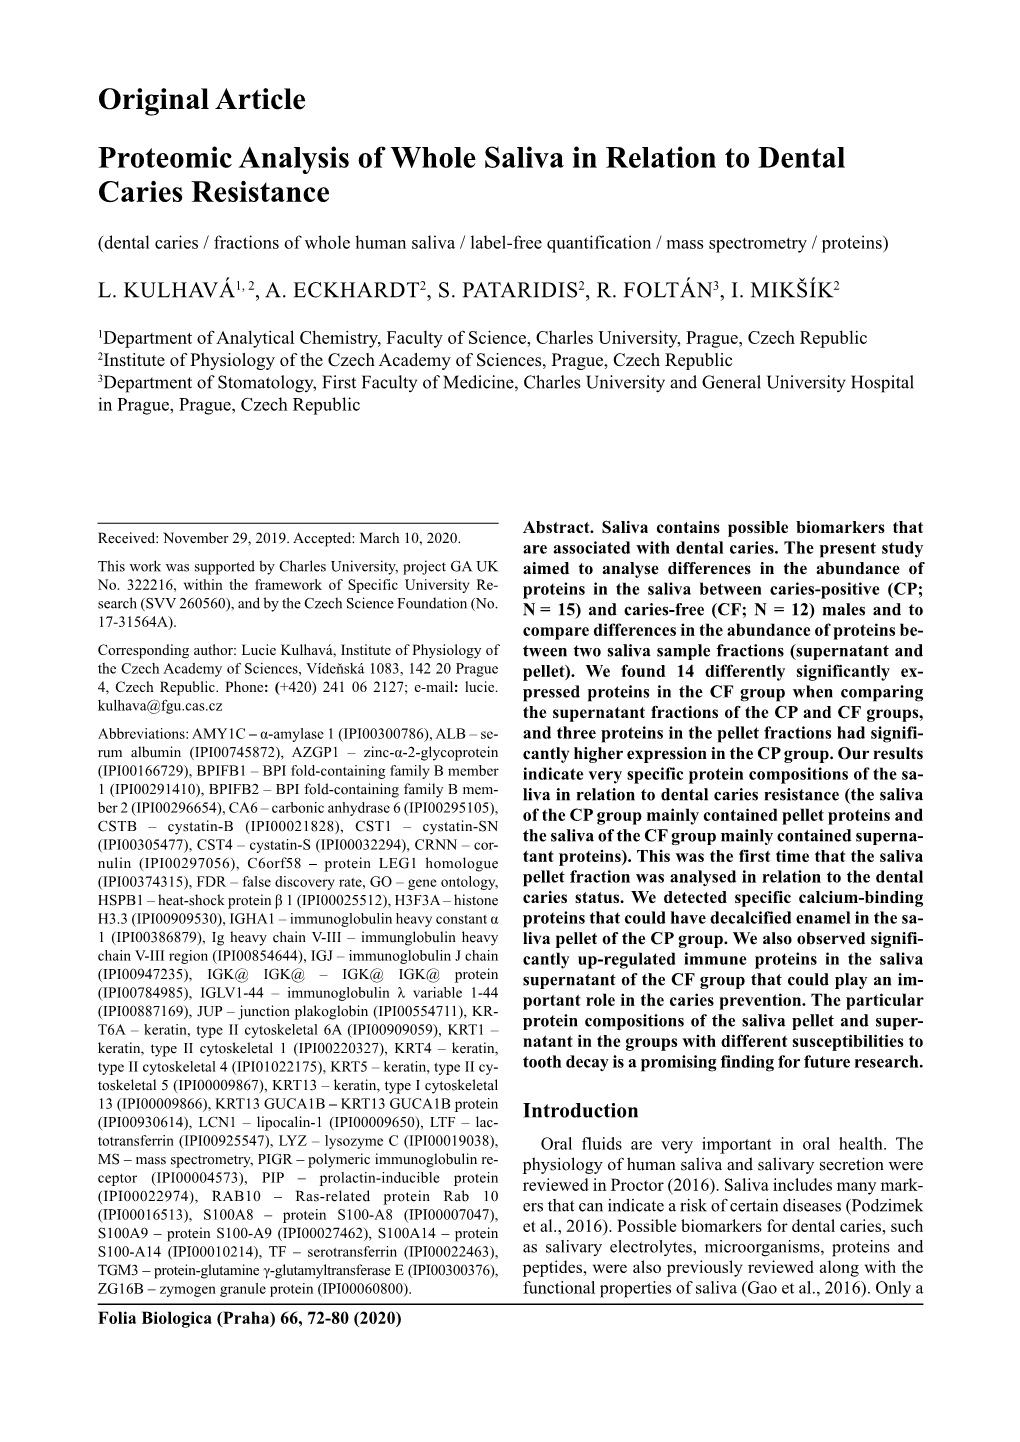 Original Article Proteomic Analysis of Whole Saliva in Relation to Dental Caries Resistance